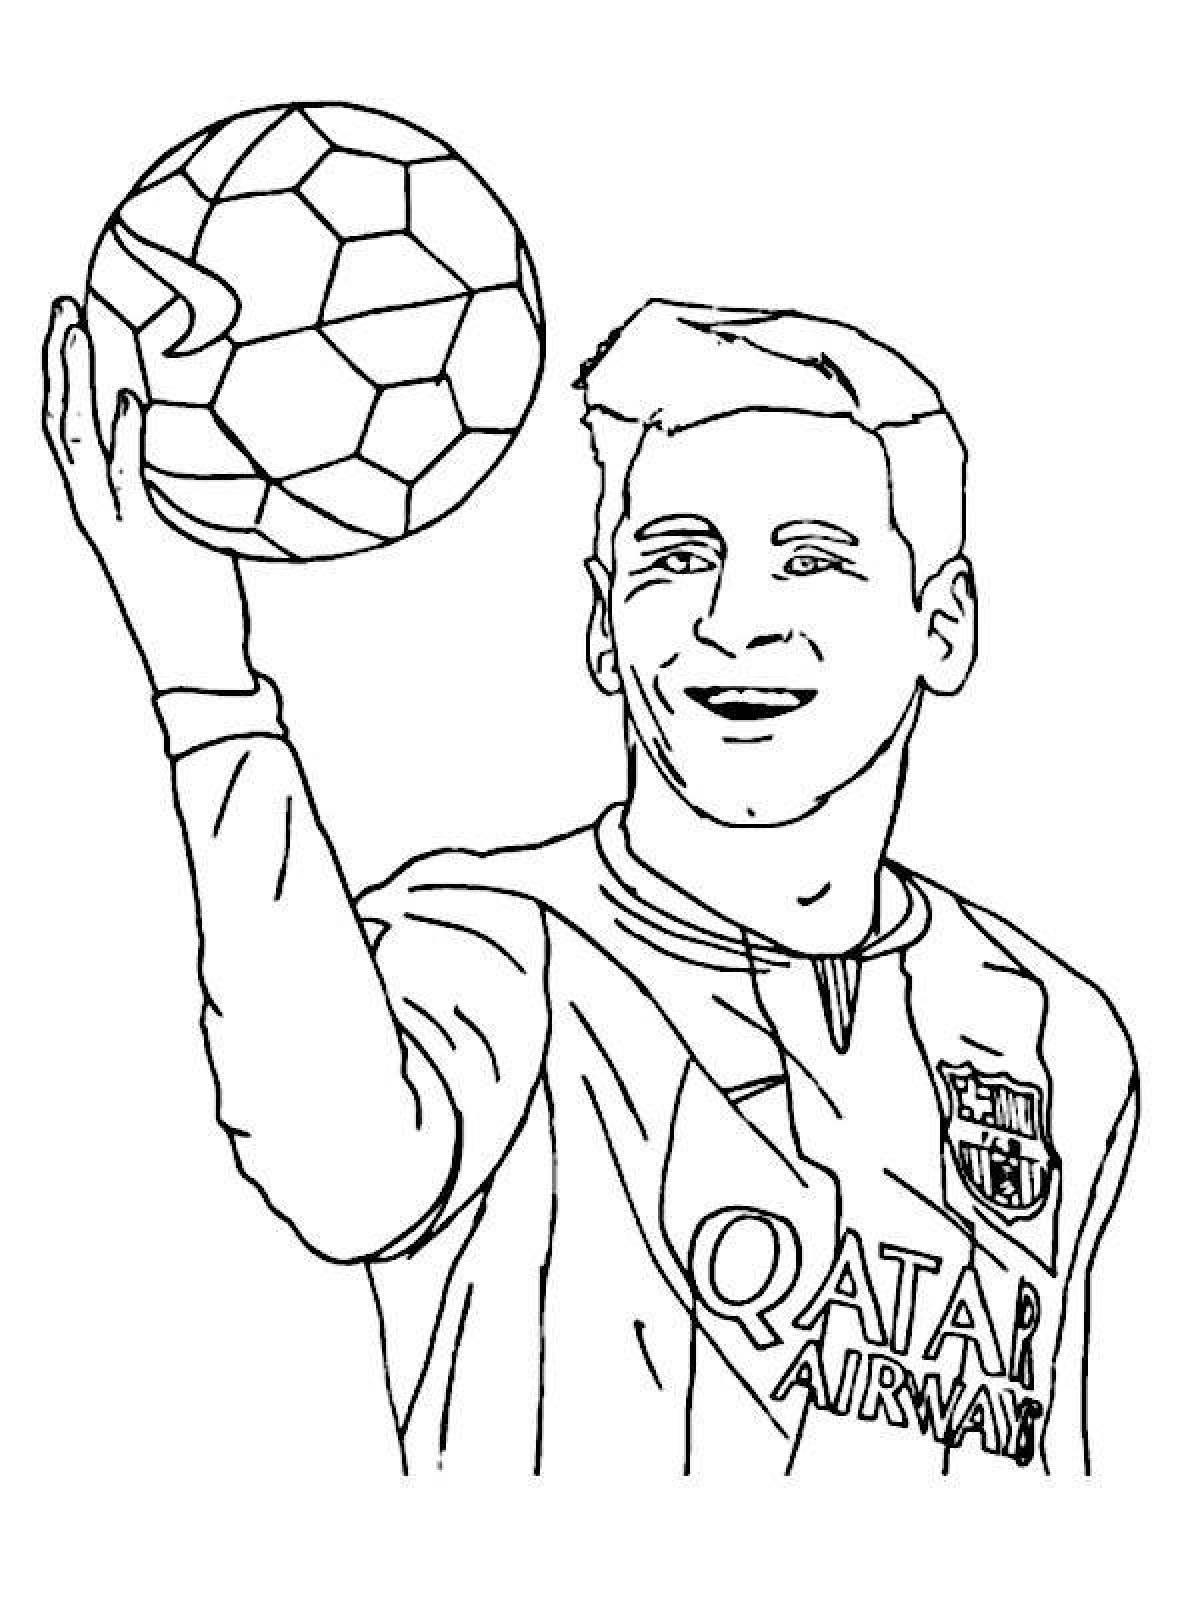 Gorgeous ronaldo and messi coloring pages